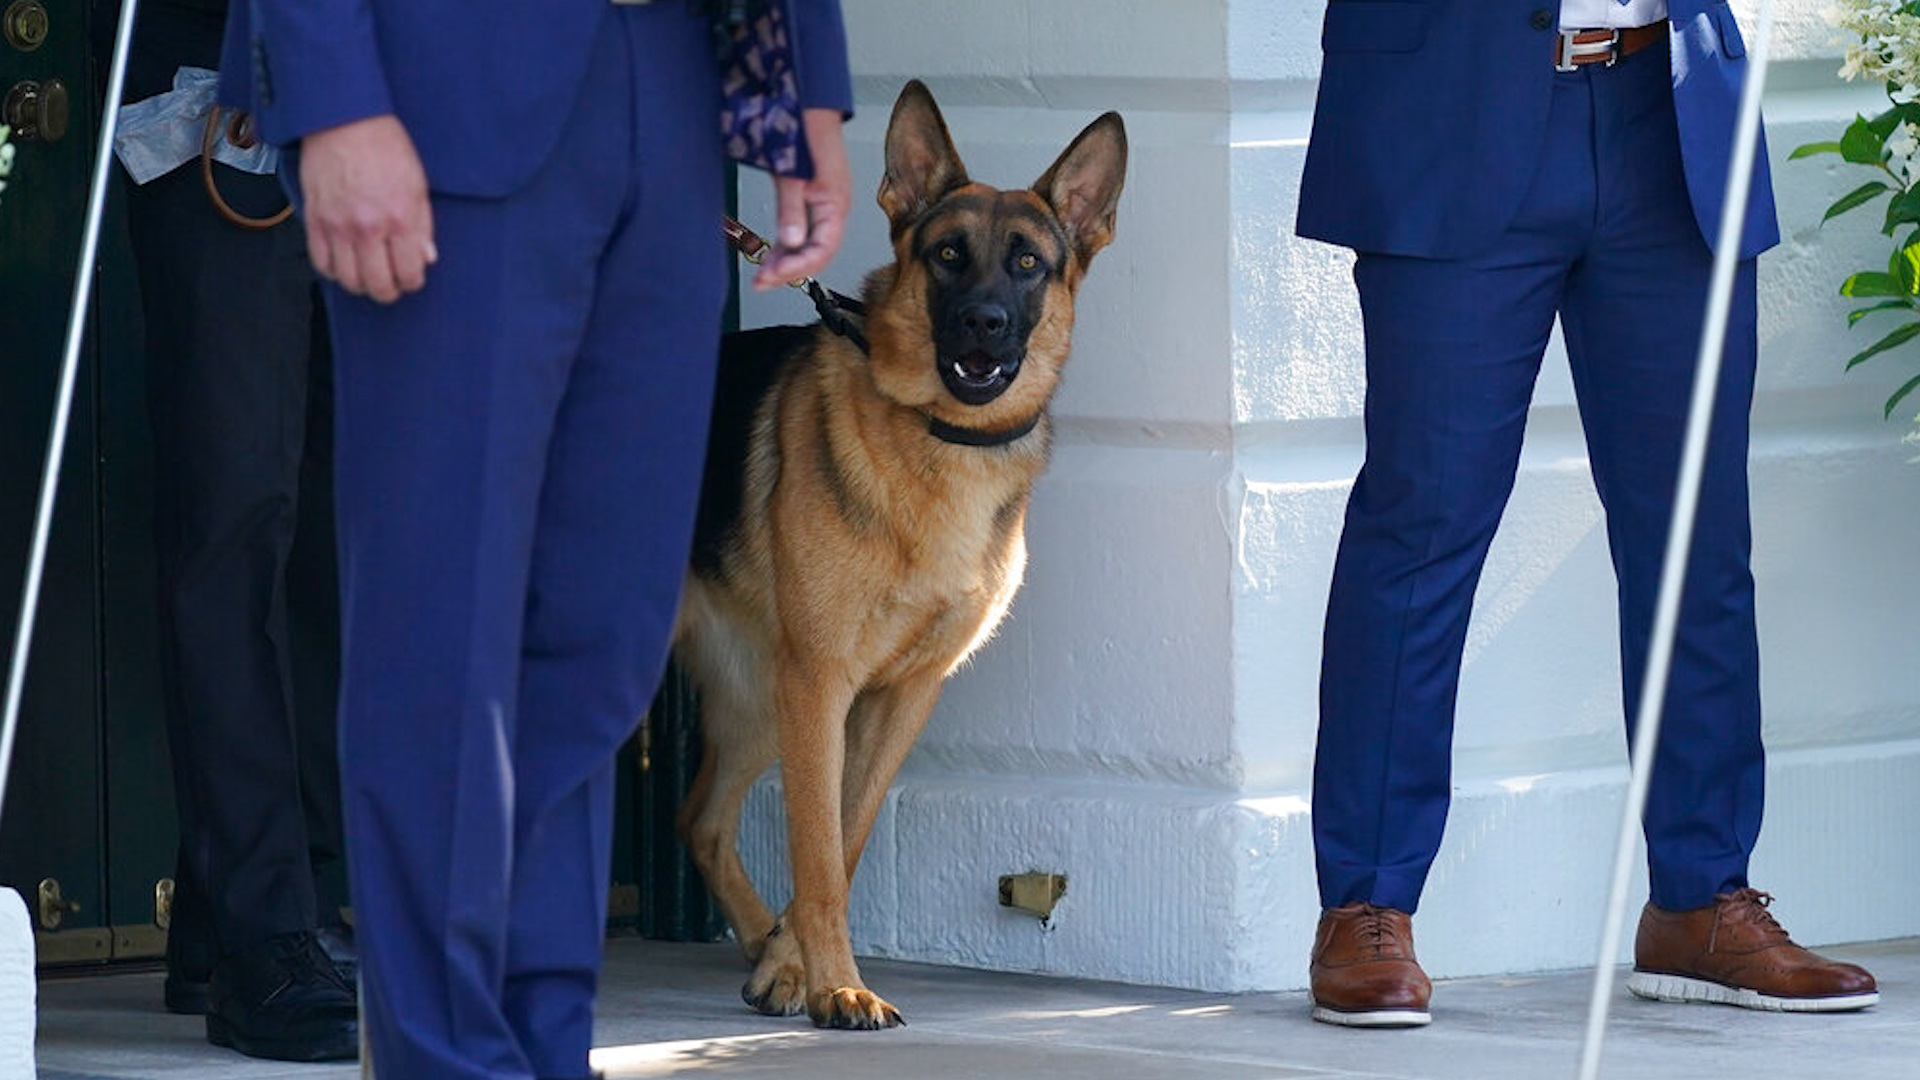 Secret Service records released recently have unveiled that President Joe Biden's German shepherd, Commander, was involved in at least 24 biting incidents over the past year, more than what was initially reported. The disclosure, which includes 269 pages of related emails, sheds light on the severity and frequency of these incidents.